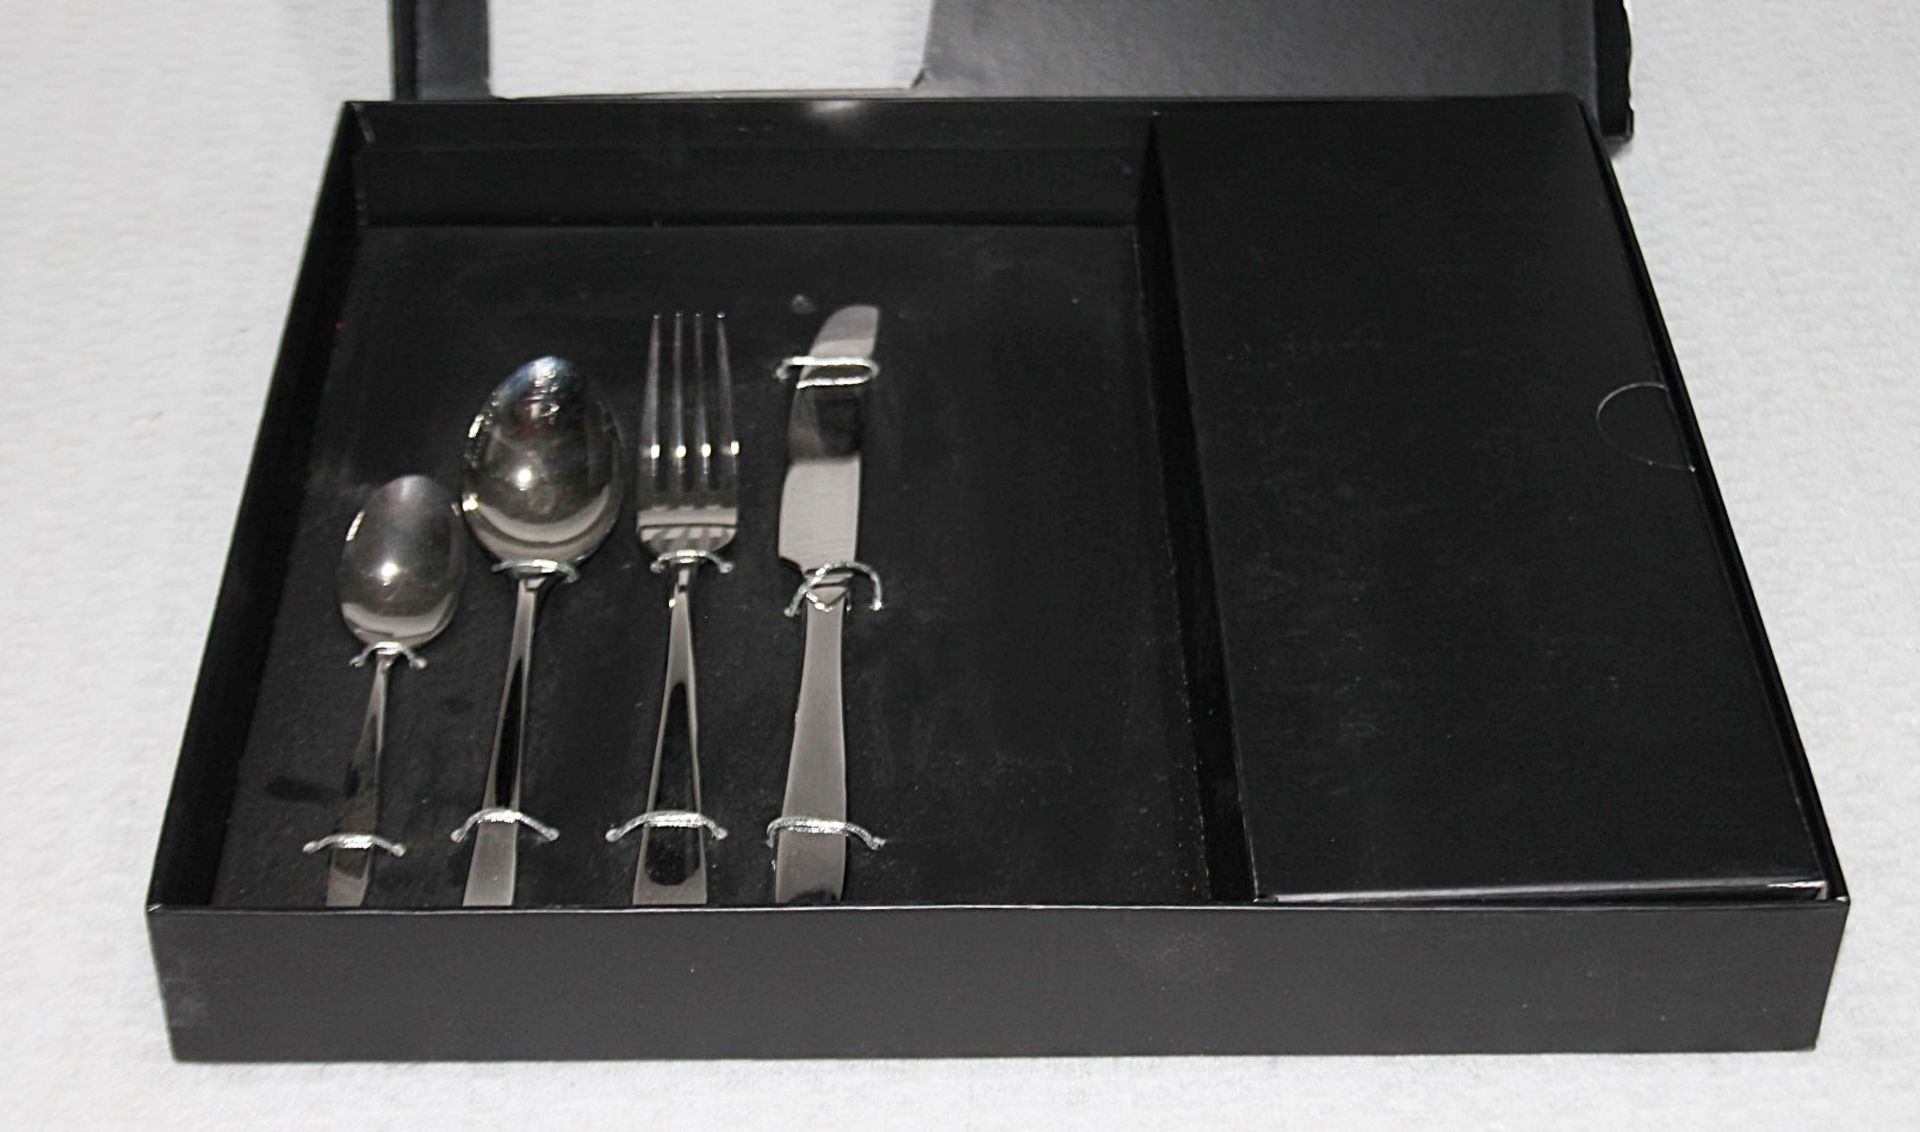 15 x Pieces Of ARTHUR PRICE Stainless Steel Cutlery - Unused Boxed Stock - Ref: HHW328/NOV21/WH2/ - Image 2 of 4